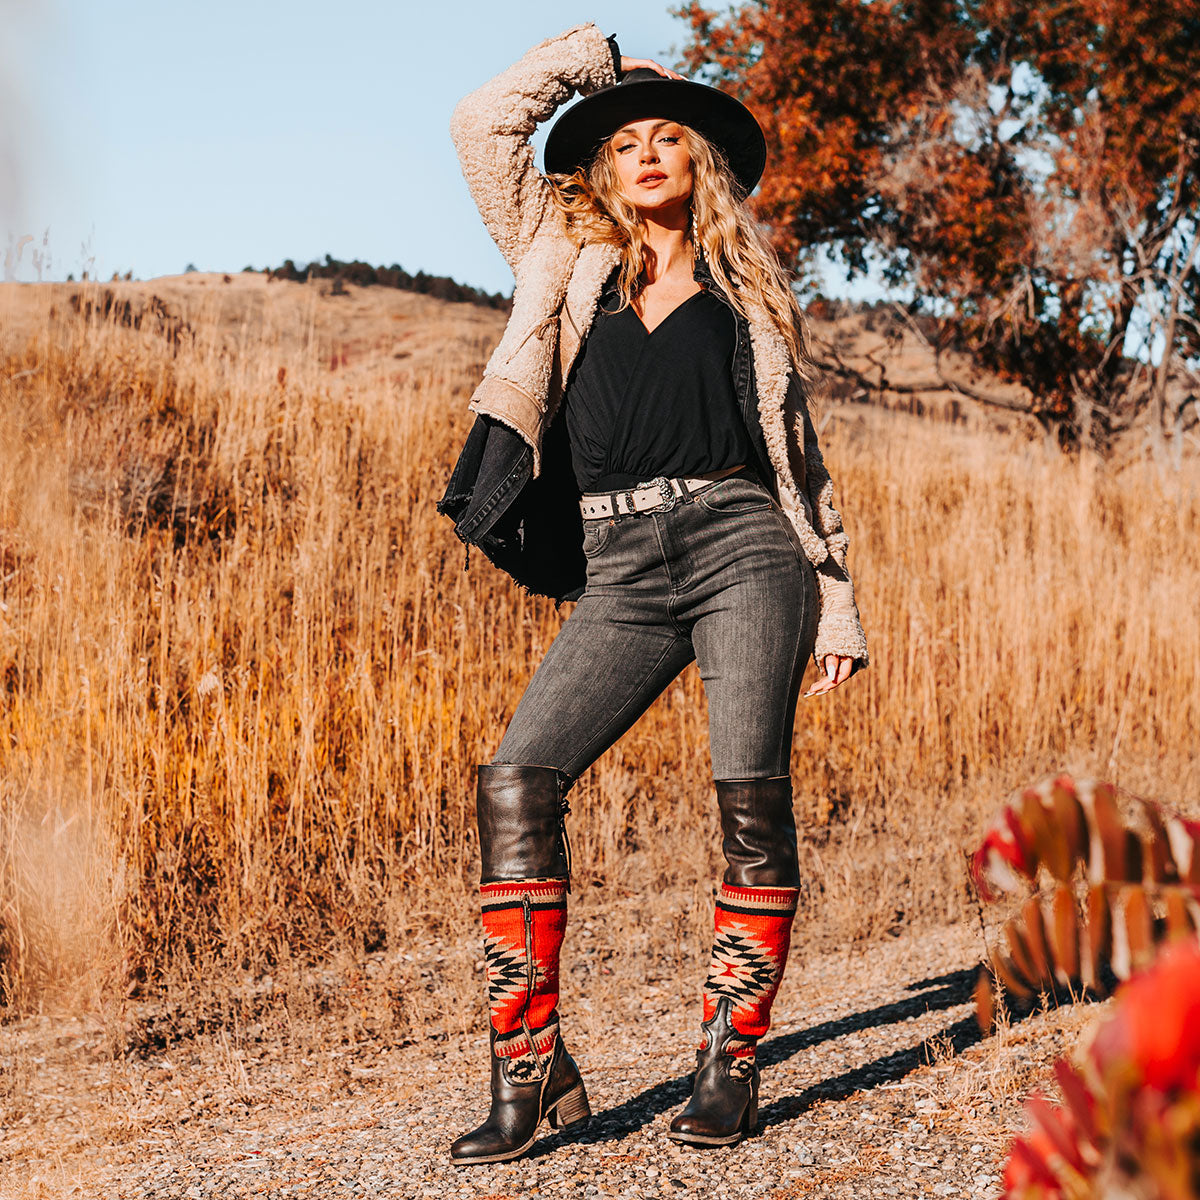 FREEBIRD women's Serape black leather knee high boot with woven detailing, leather tie lacing and an inside working brass zip closure lifestyle